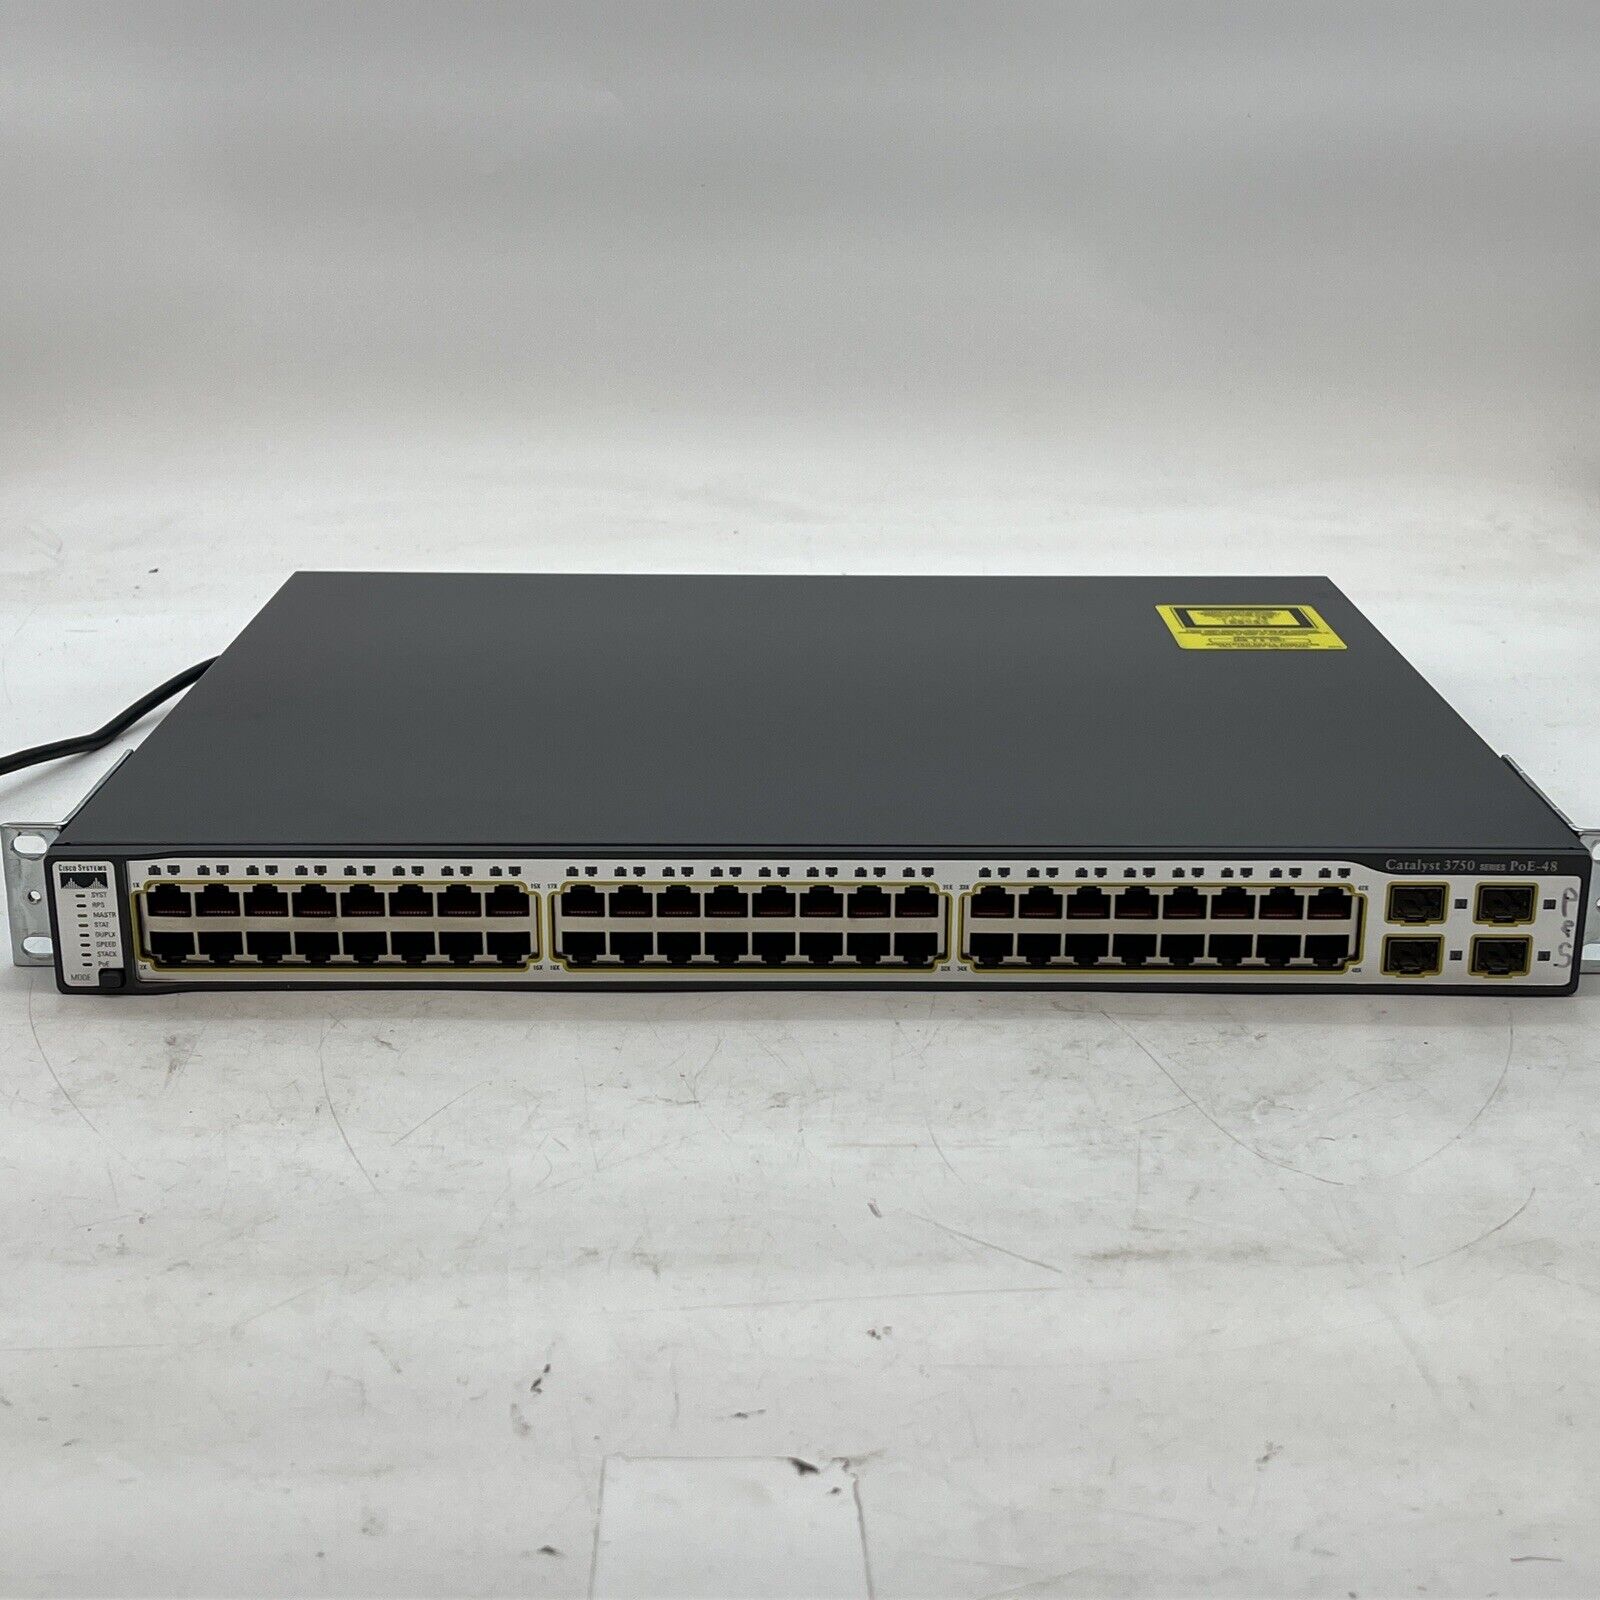 Cisco 3750 WS-C3750-48PS-S 48-Port PoE Managed Ethernet Network Switch.